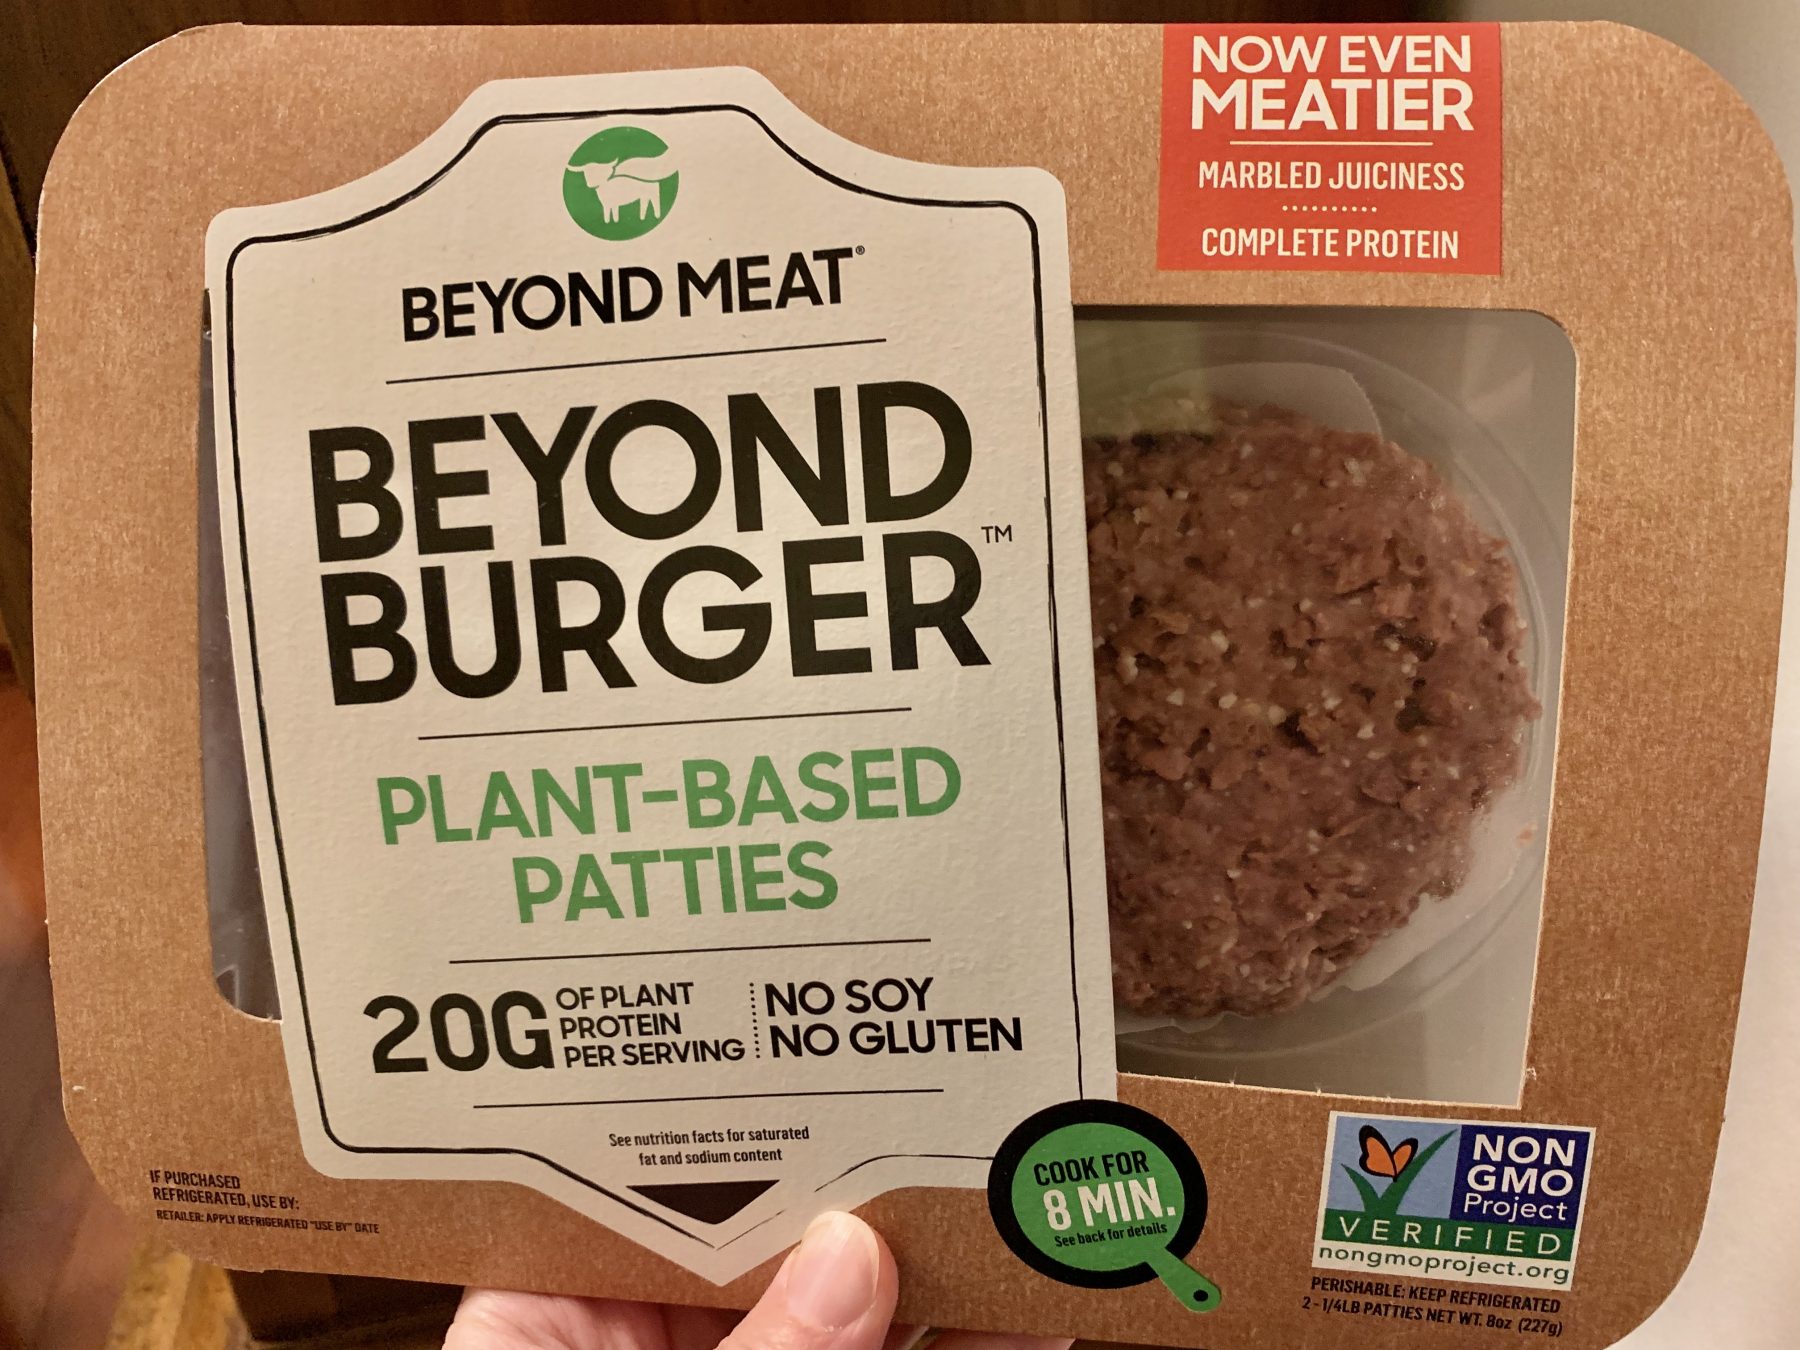 What Is Beyond Meat And How Is It Used?